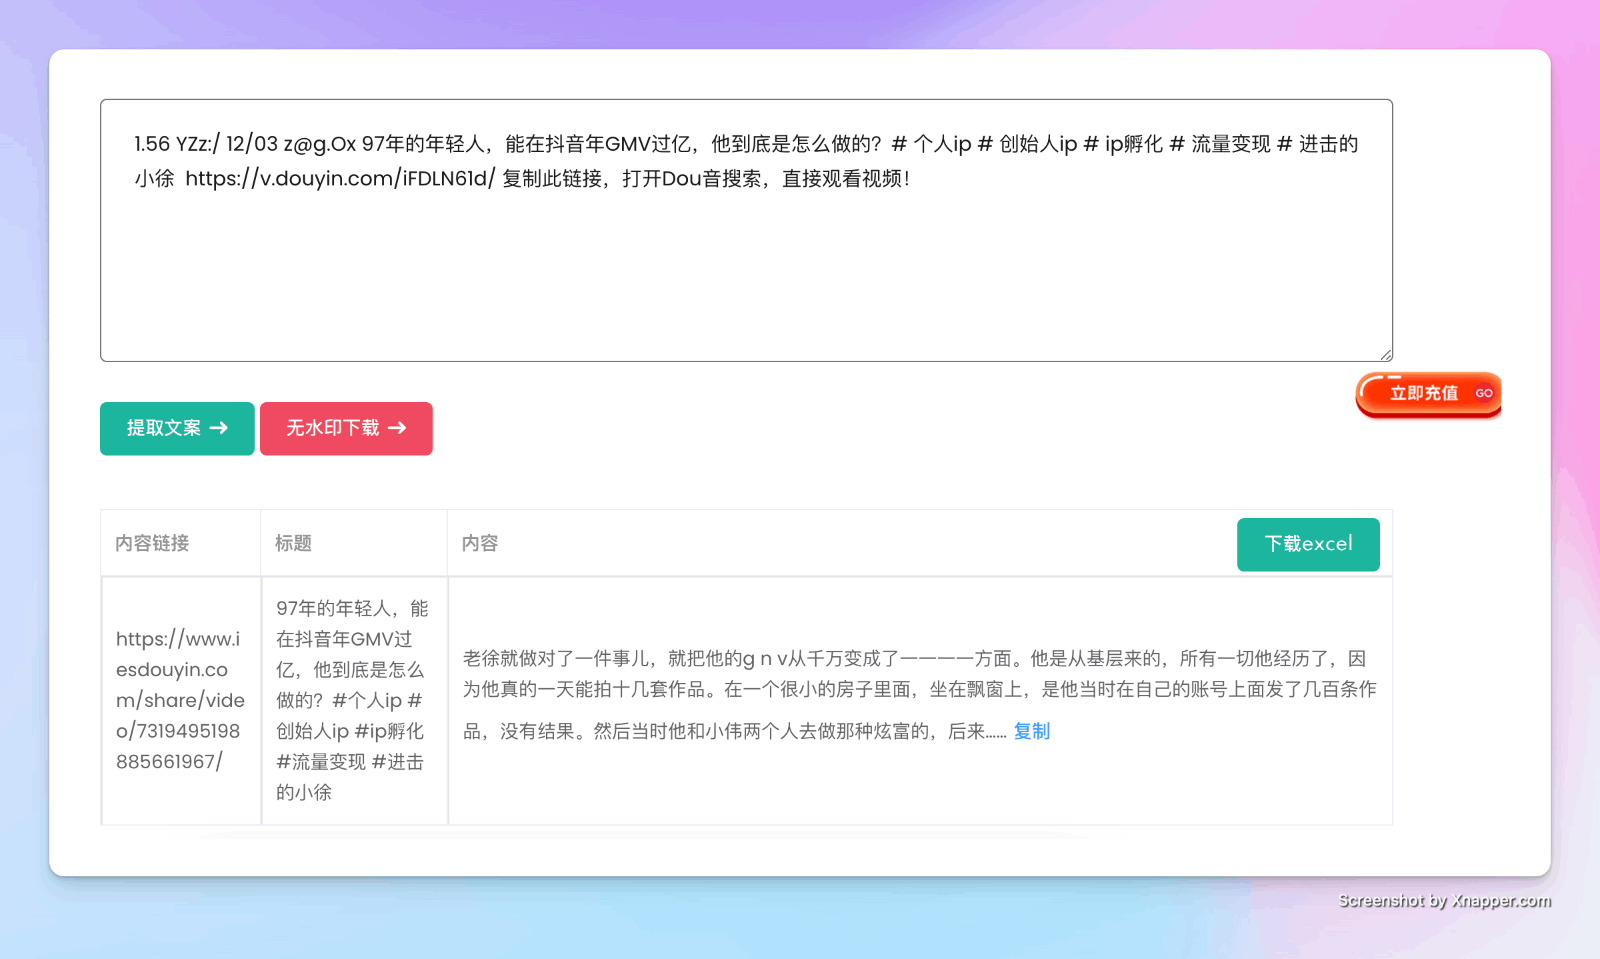 Link2 文案批量提取